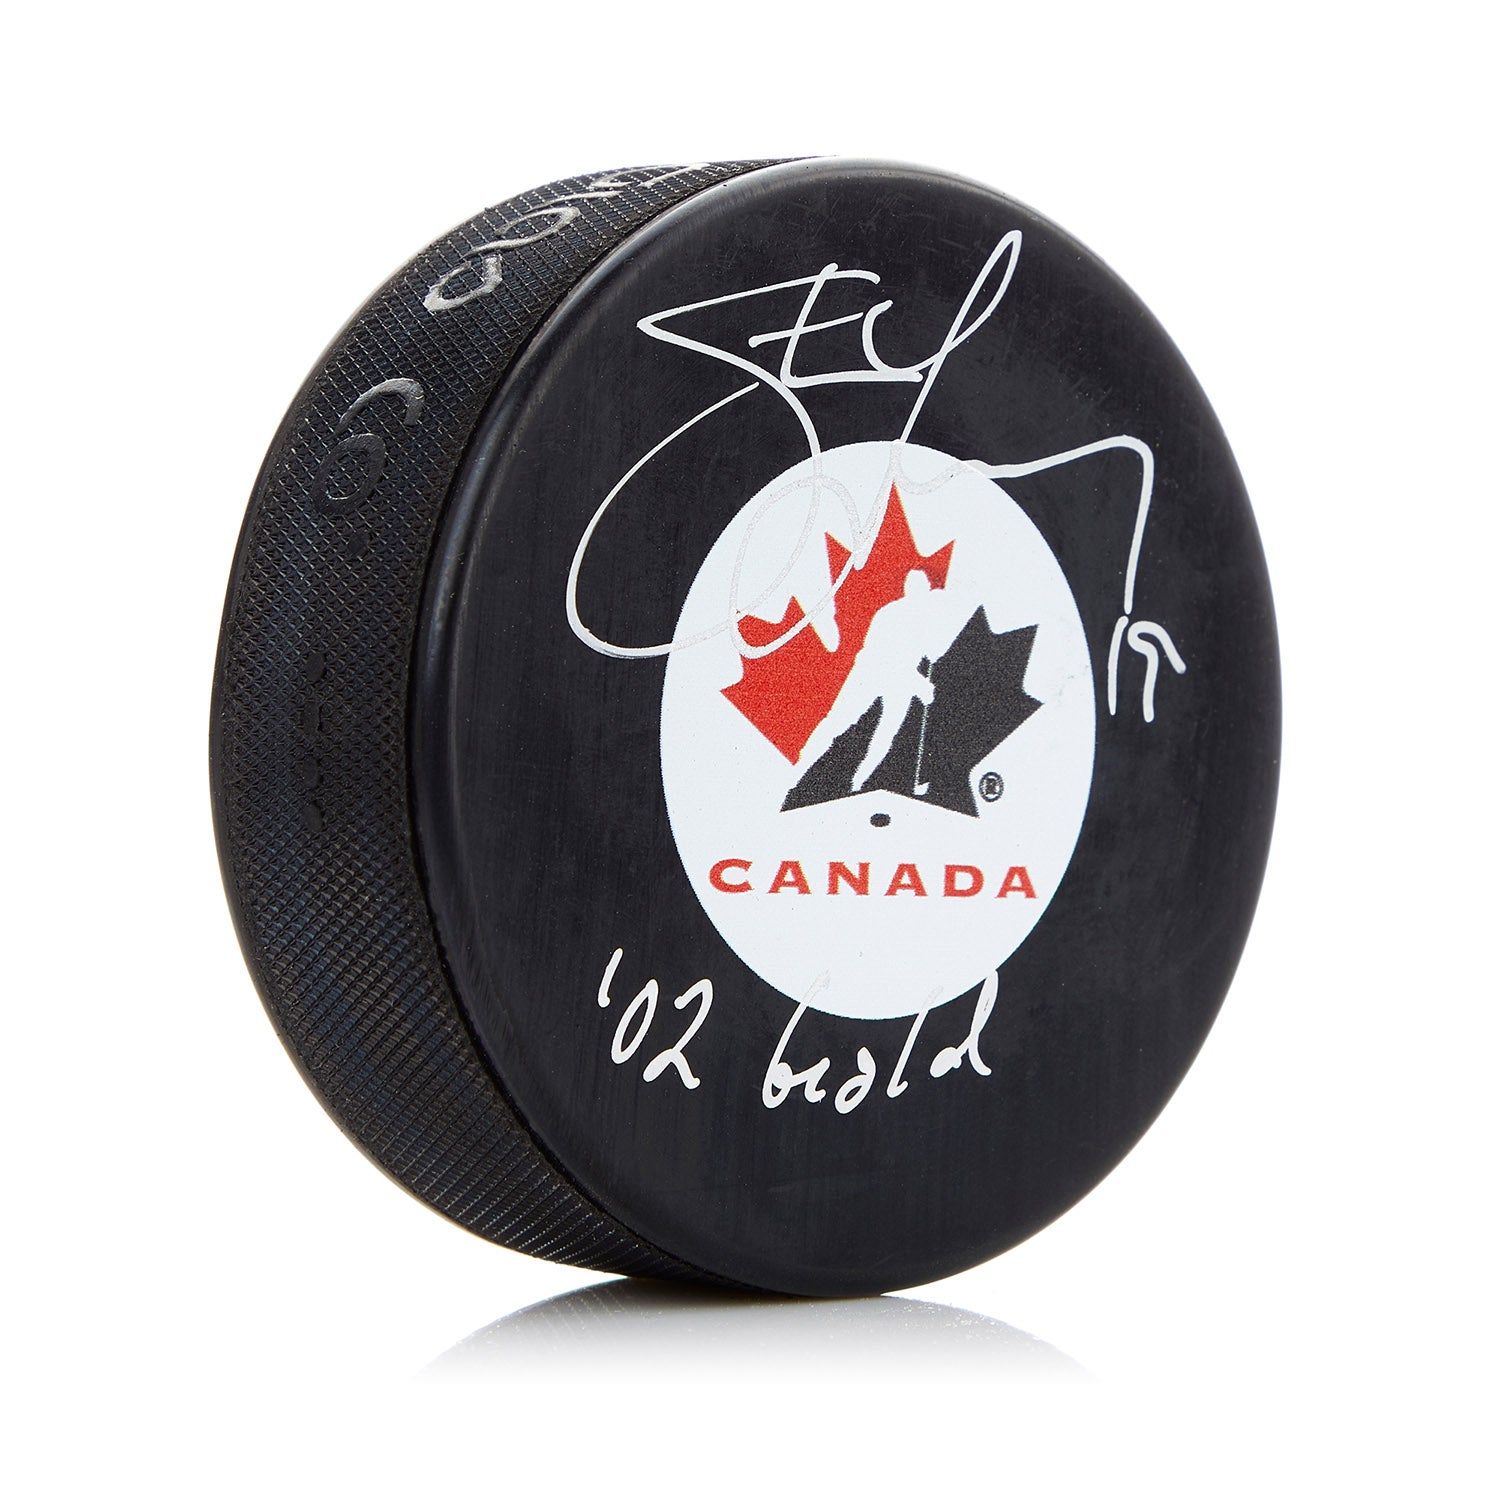 Steve Yzerman Team Canada Signed Hockey Puck with 02 Gold Note